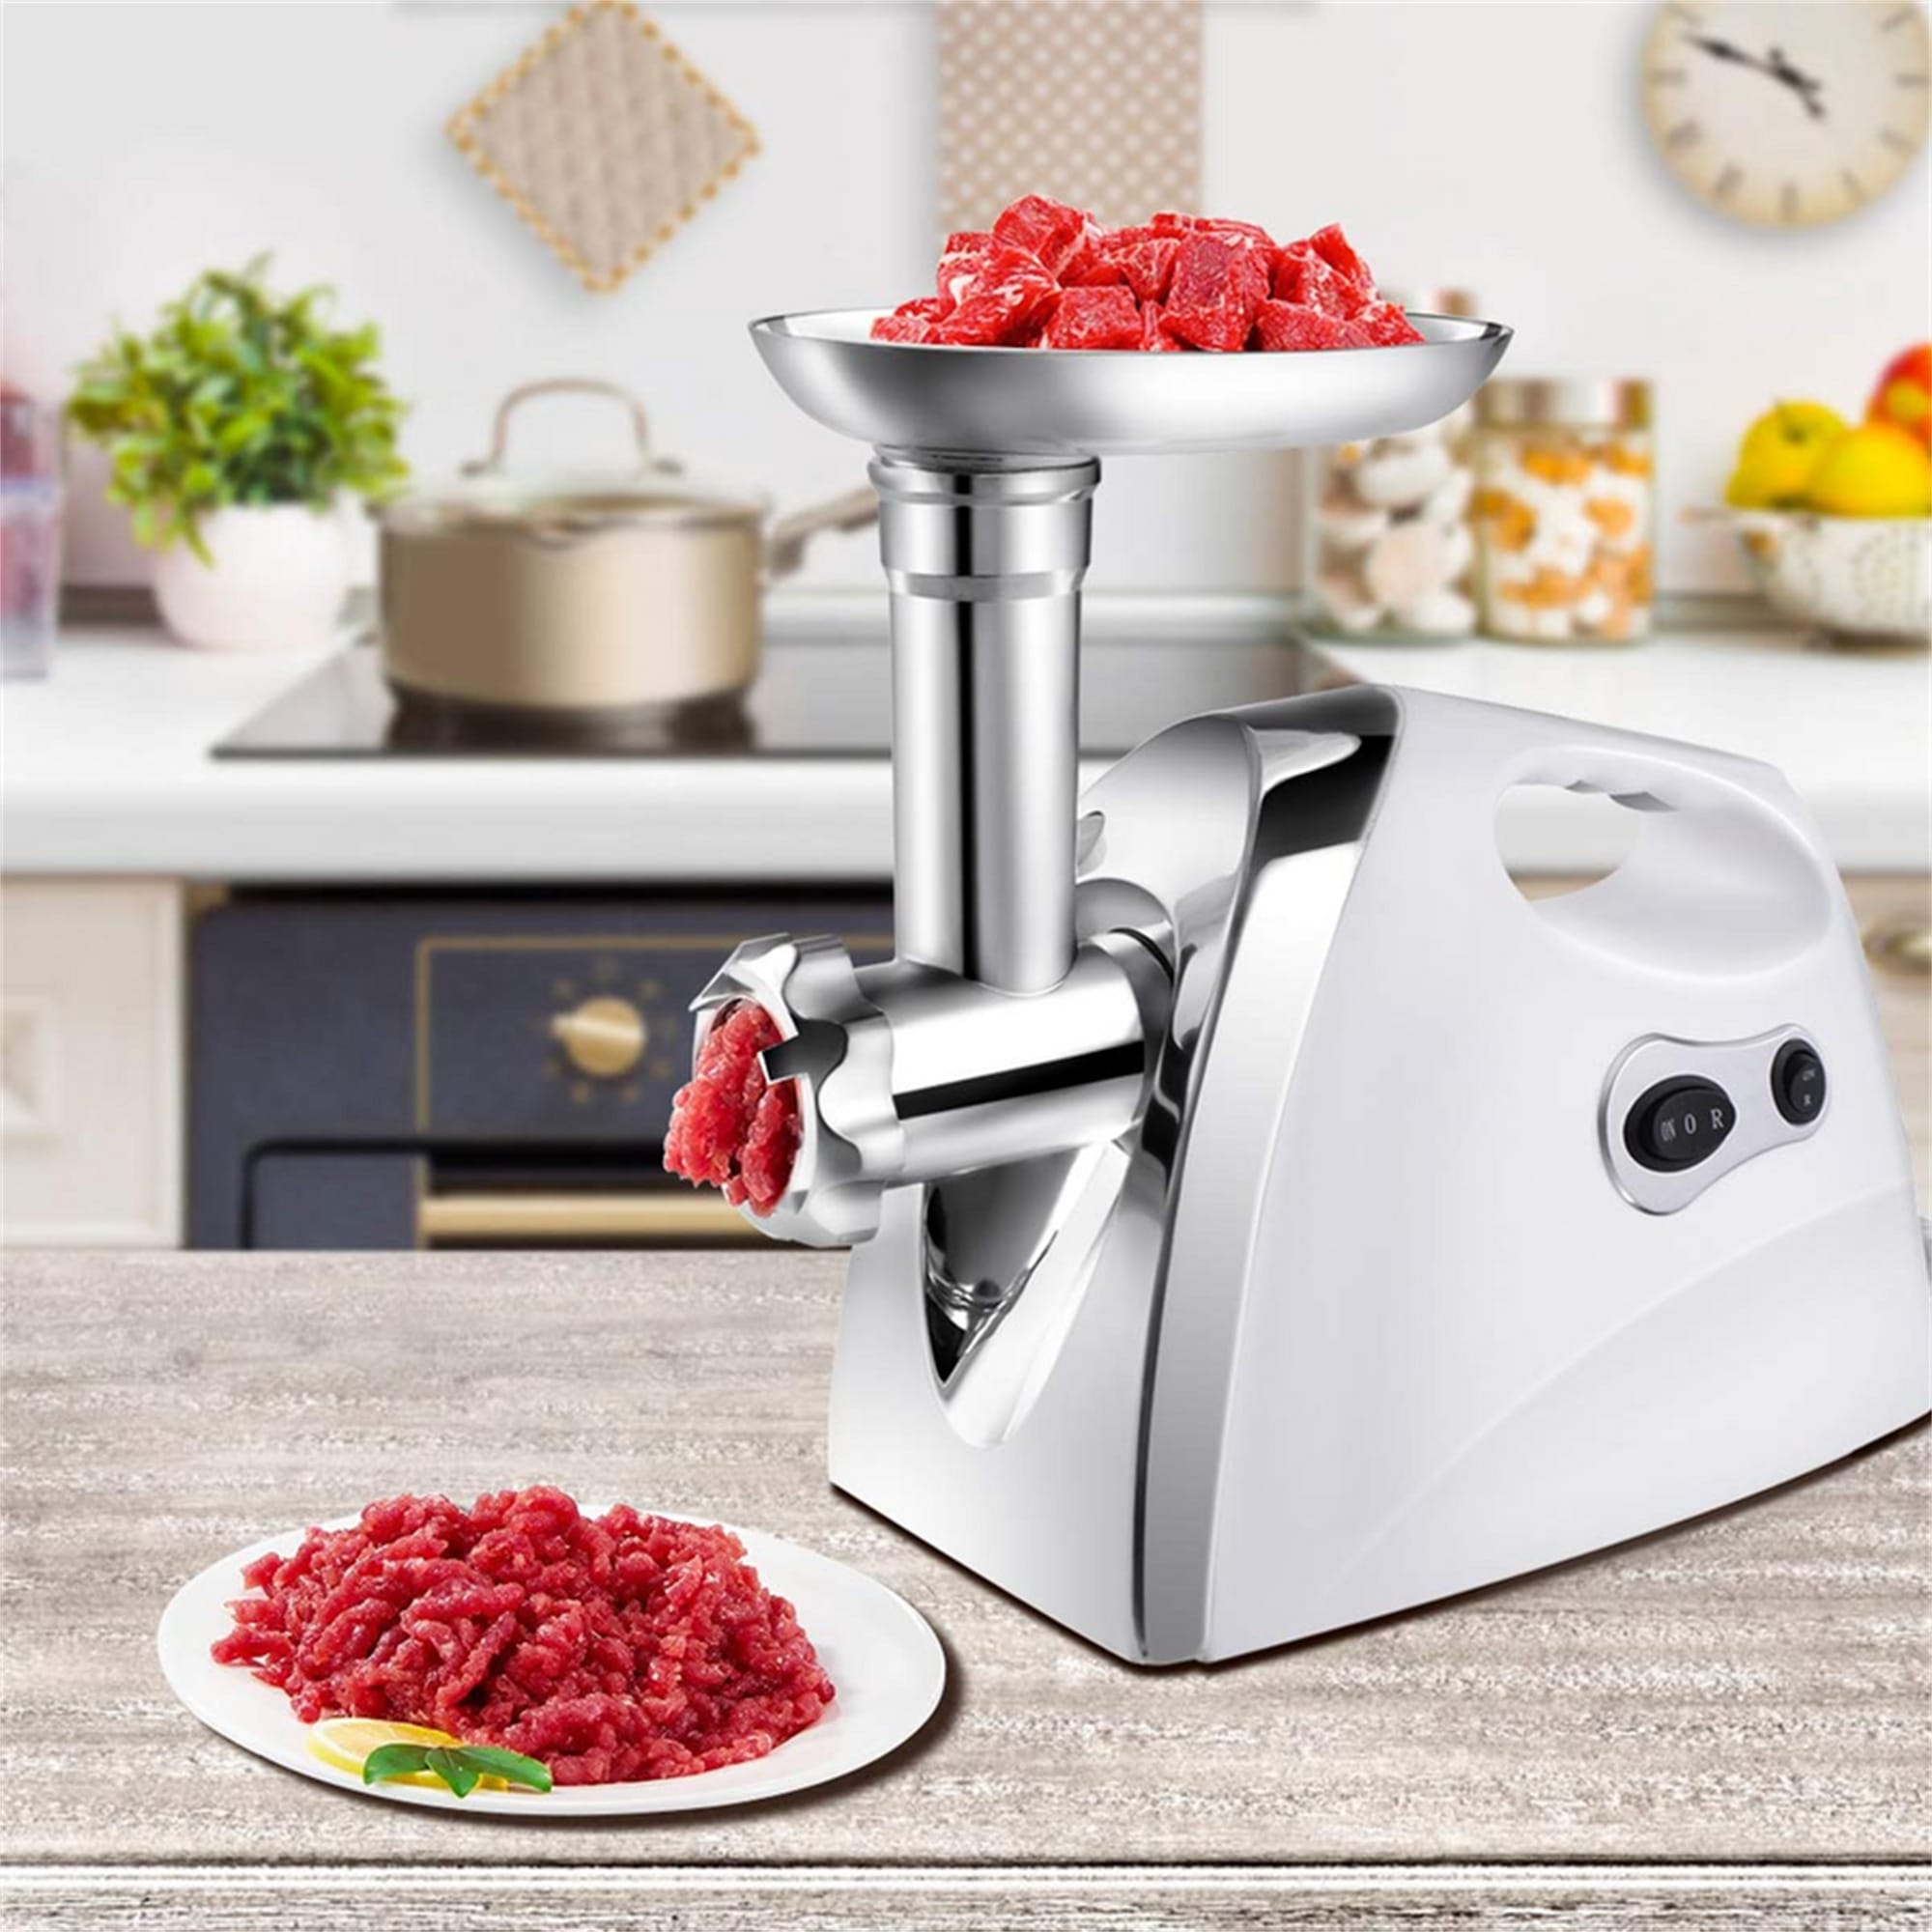 https://ak1.ostkcdn.com/images/products/is/images/direct/ebc1f03c29119de3255735a4304f3b72b5960347/Stainless-Steel-Electric-Meat-Grinder%2C-Sausage-Stuffer-Kit-for-Home.jpg